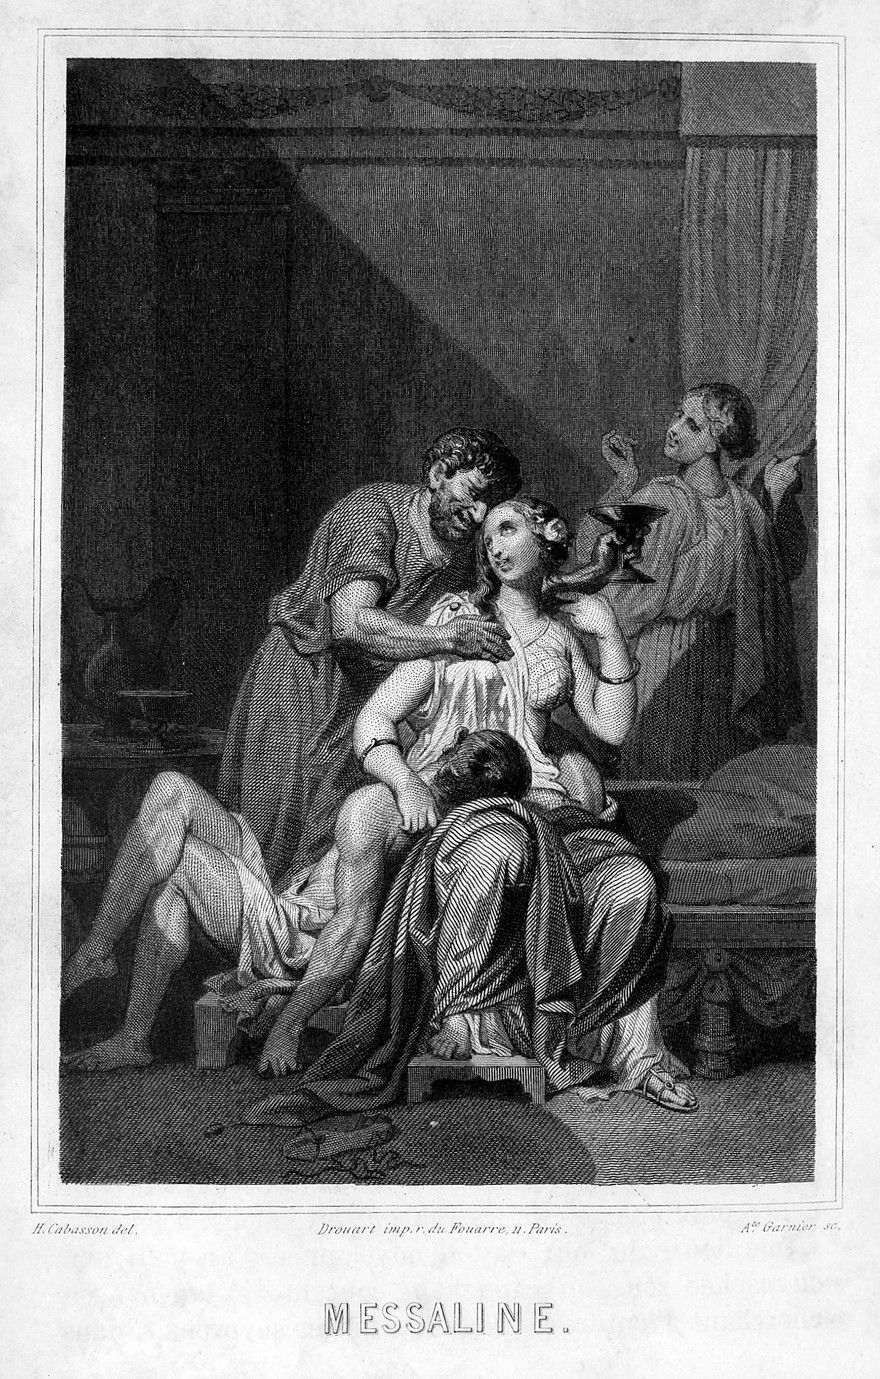 A black and white drawing showing a woman sat centrally wearing a white robe, with a male figure draped over her legs. Another male is leaning over her with his arm around her holding a cocktail shaped glass in his hand. Another female in robes is in the background looking over her shoulder at the scene.